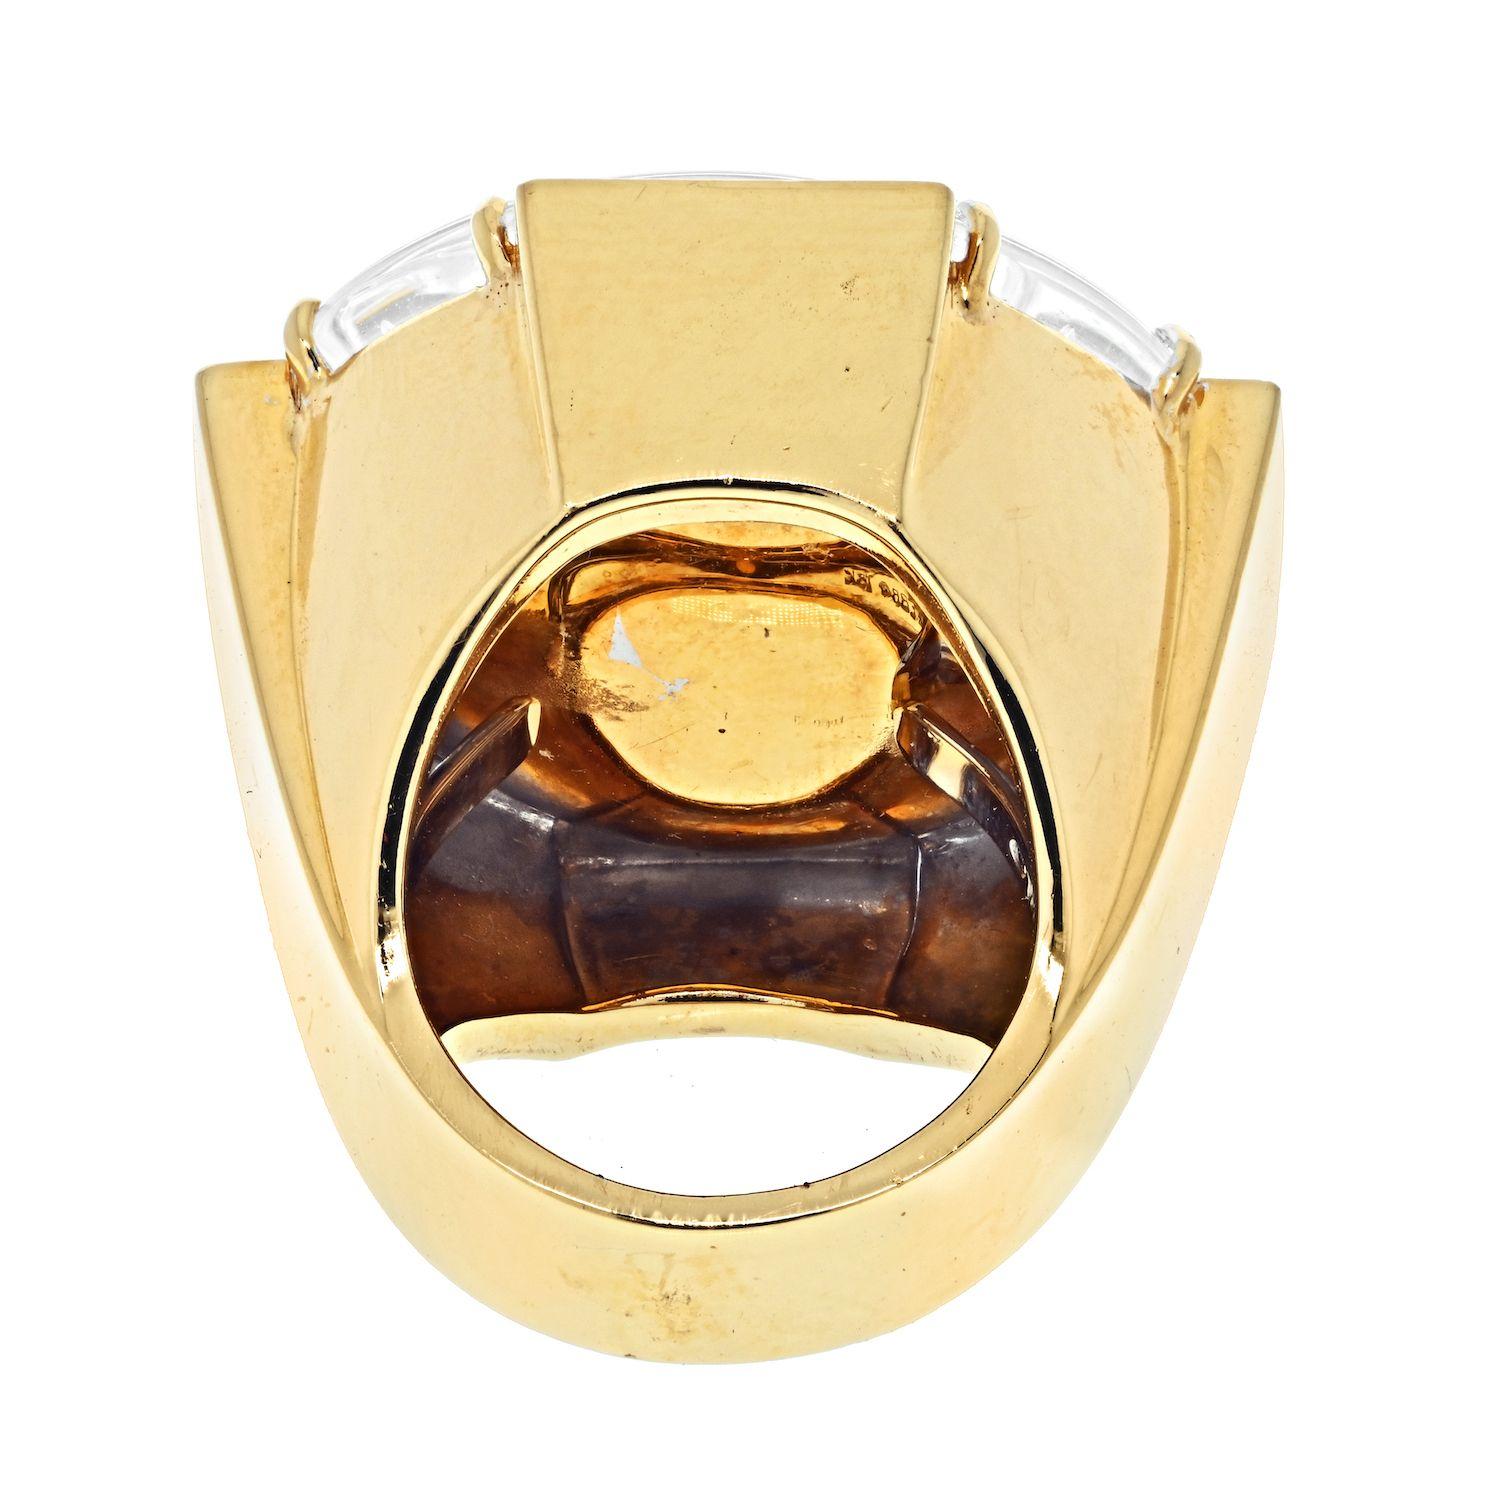 One of a kind David Webb octagonal rock crystal and diamond ring made in 18k yellow gold with diamond accents on north south east west framing bars.
Ring size 6
Overall about 1 inch wide.